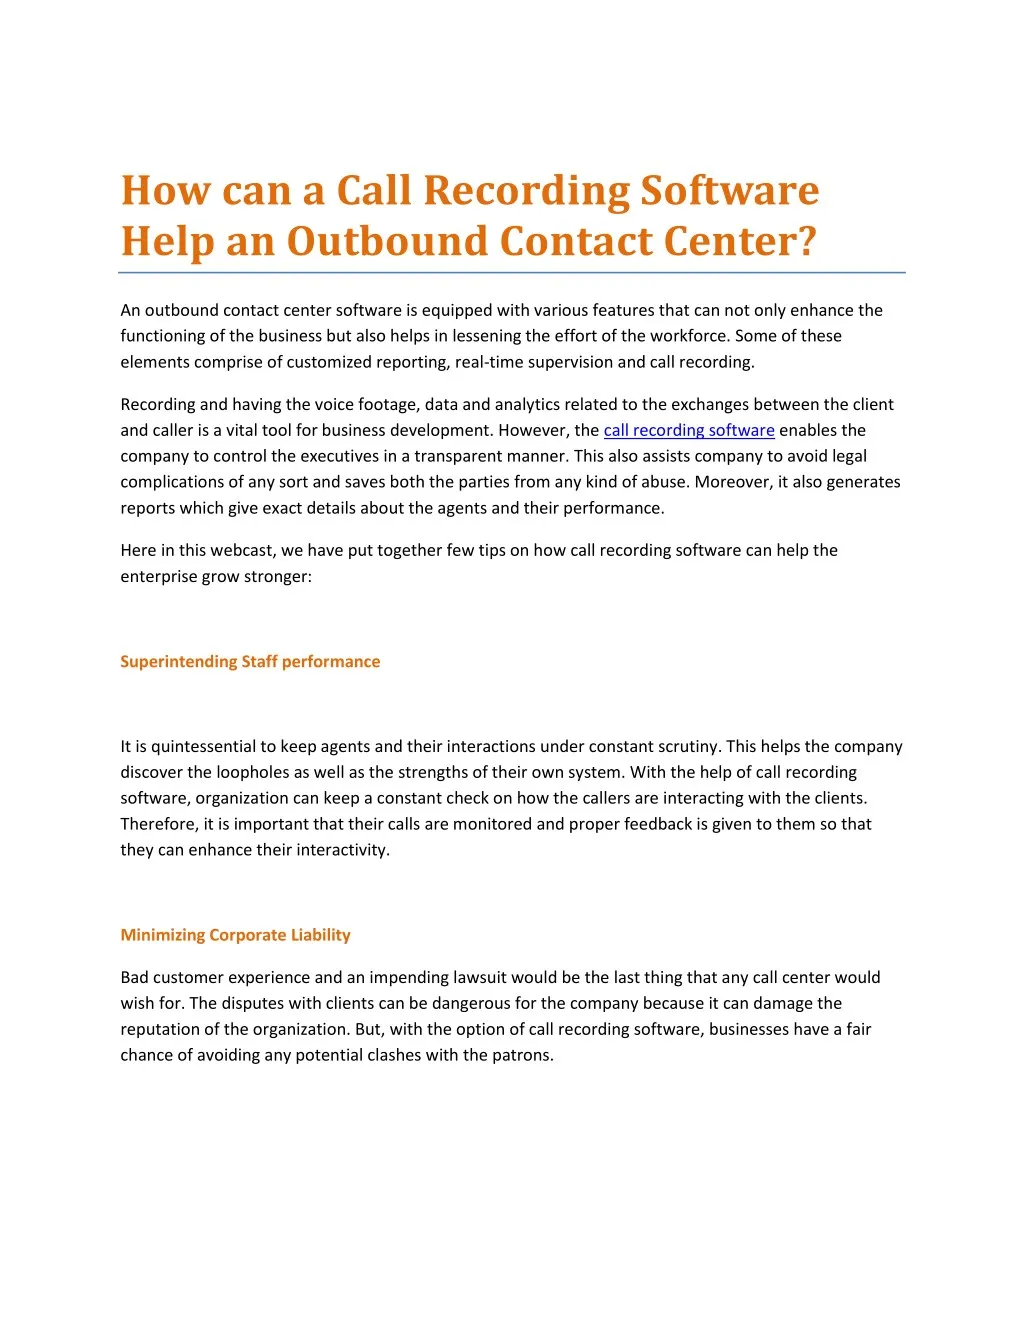 how can a call recording software help